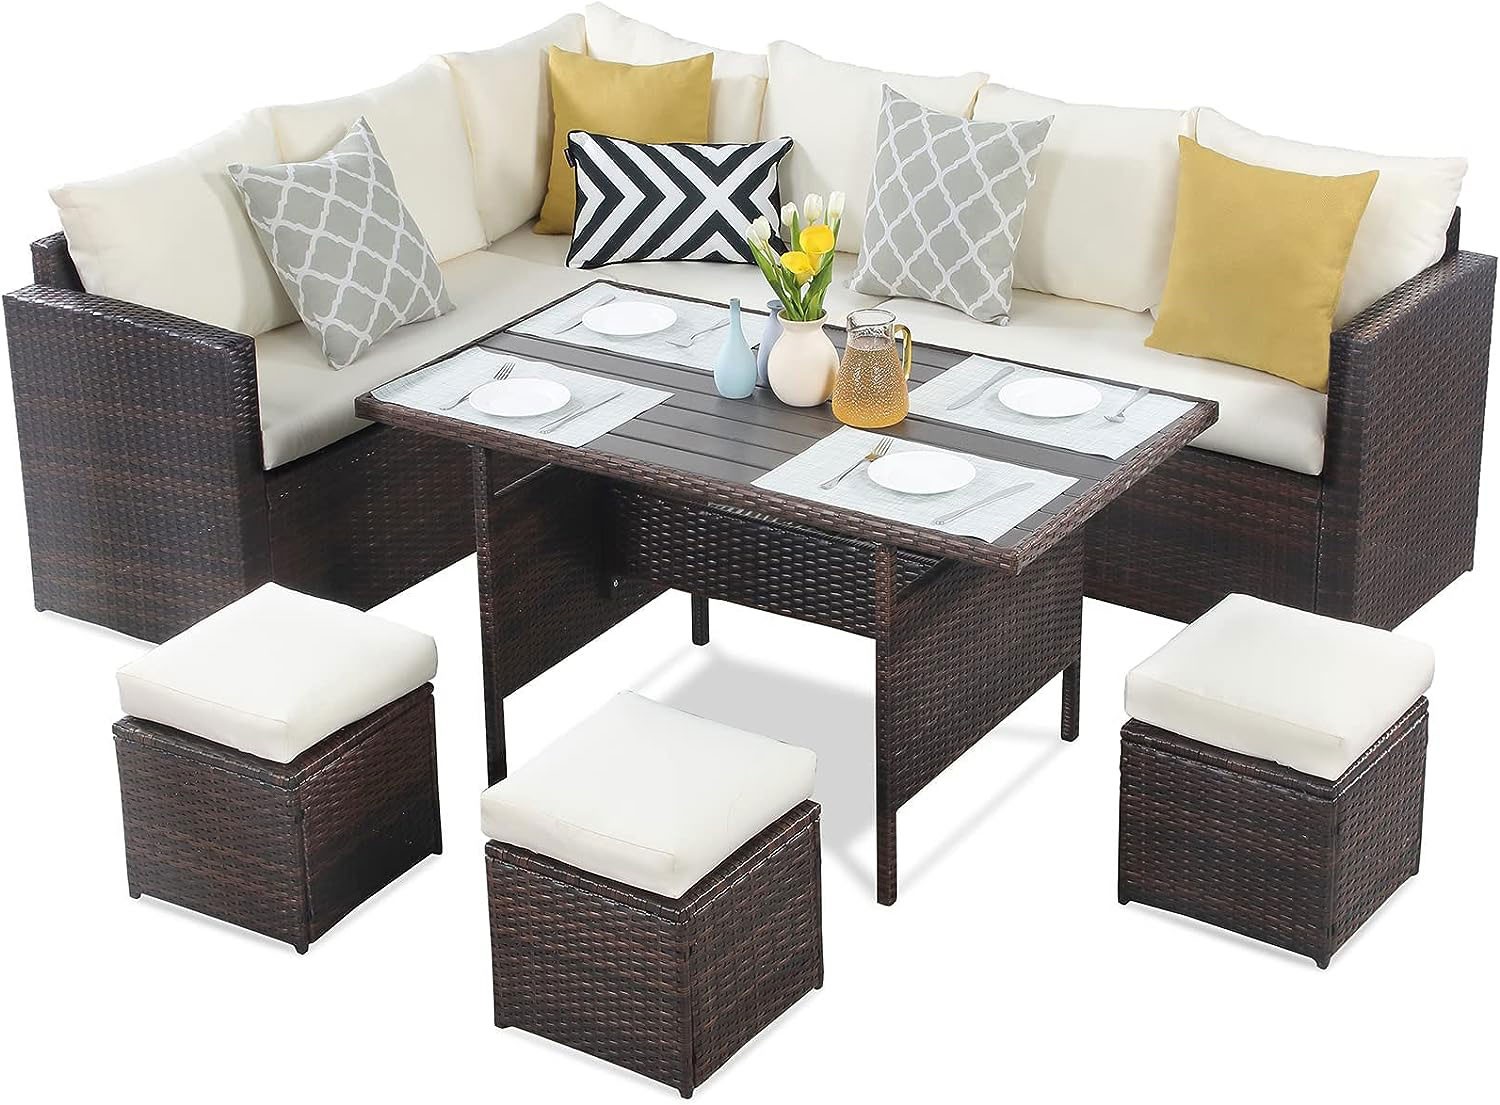 Wisteria Lane Patio Furniture Set - Outdoor Dining Sectional Sofa with Table and Chair, All Weather Wicker, Ivory